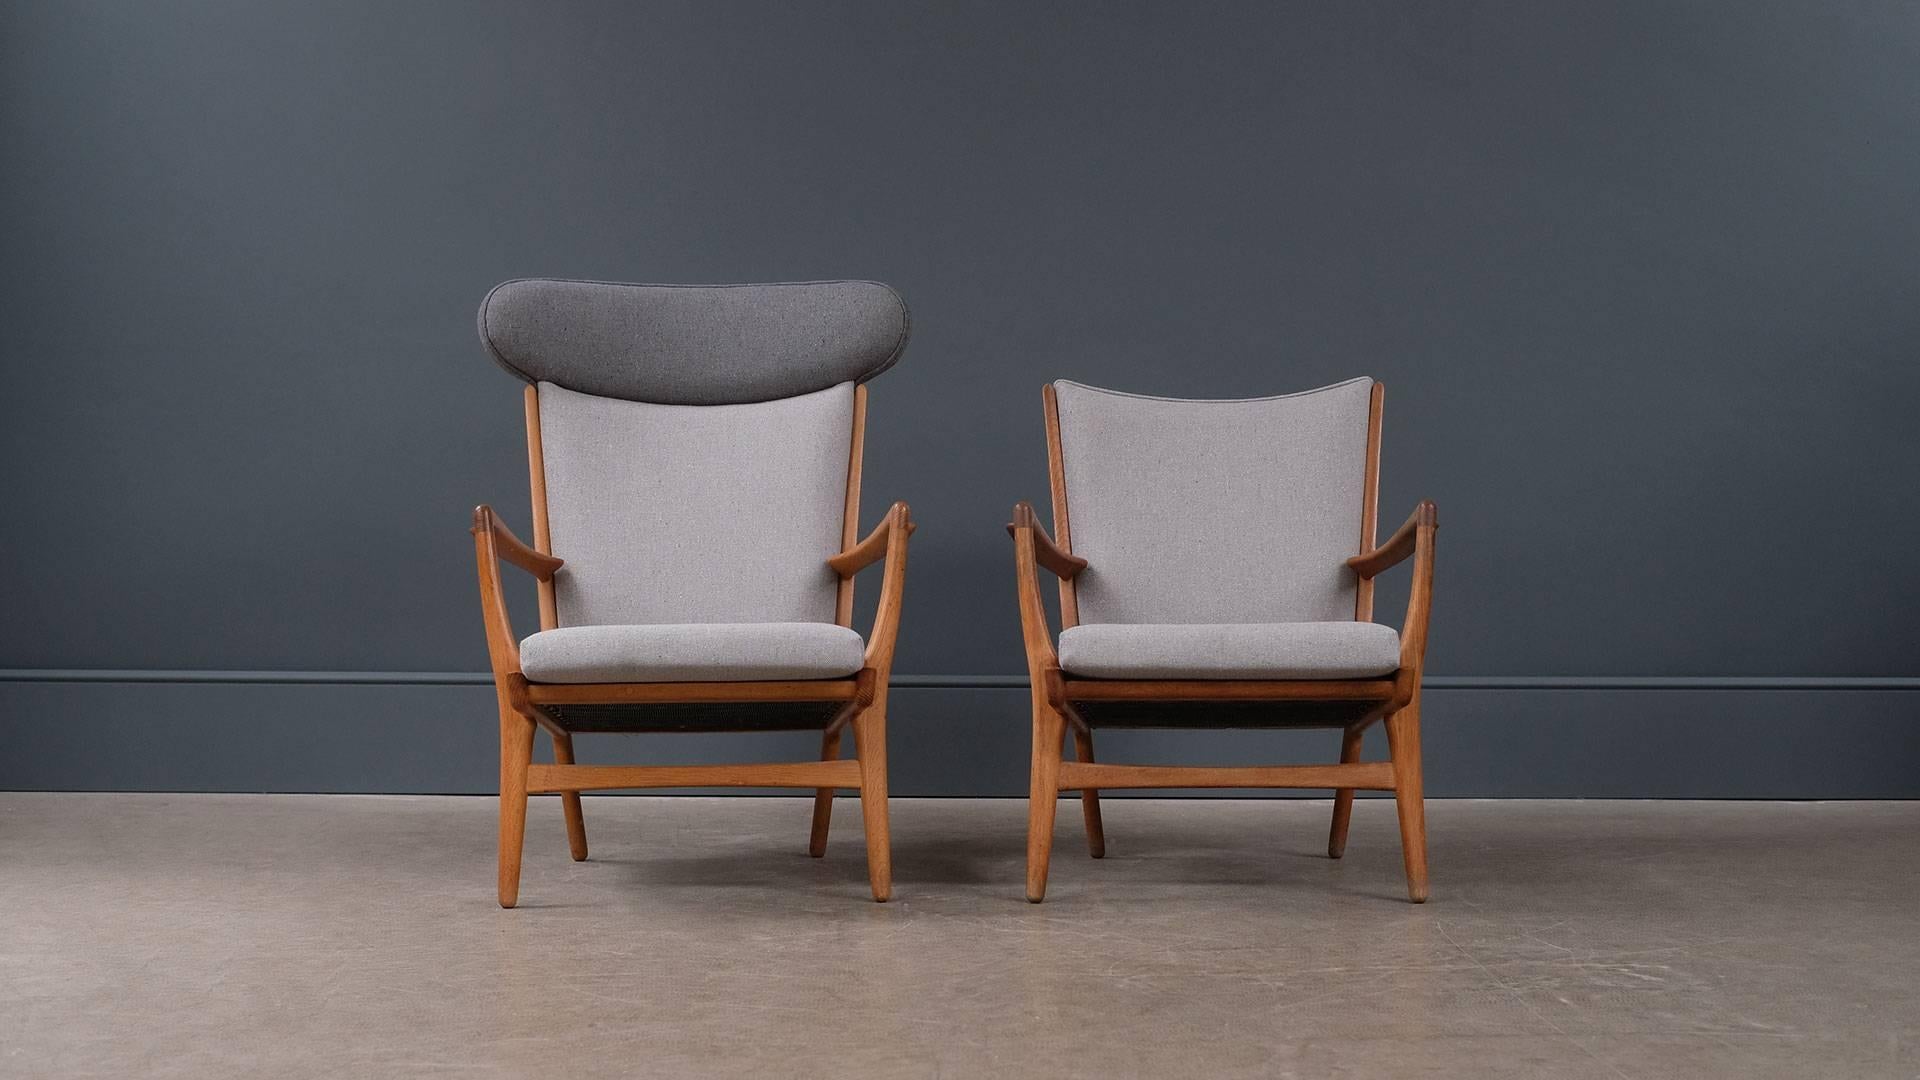 Amazing and rare pair of AP 15/16 armchairs in sculptural solid oak designed by Hans Wegner for master cabinet maker AP Stolen in 1951, Denmark. Fully refurbished and re-upholstered in beautiful fleck fabric. Fantastic and rare pair of super